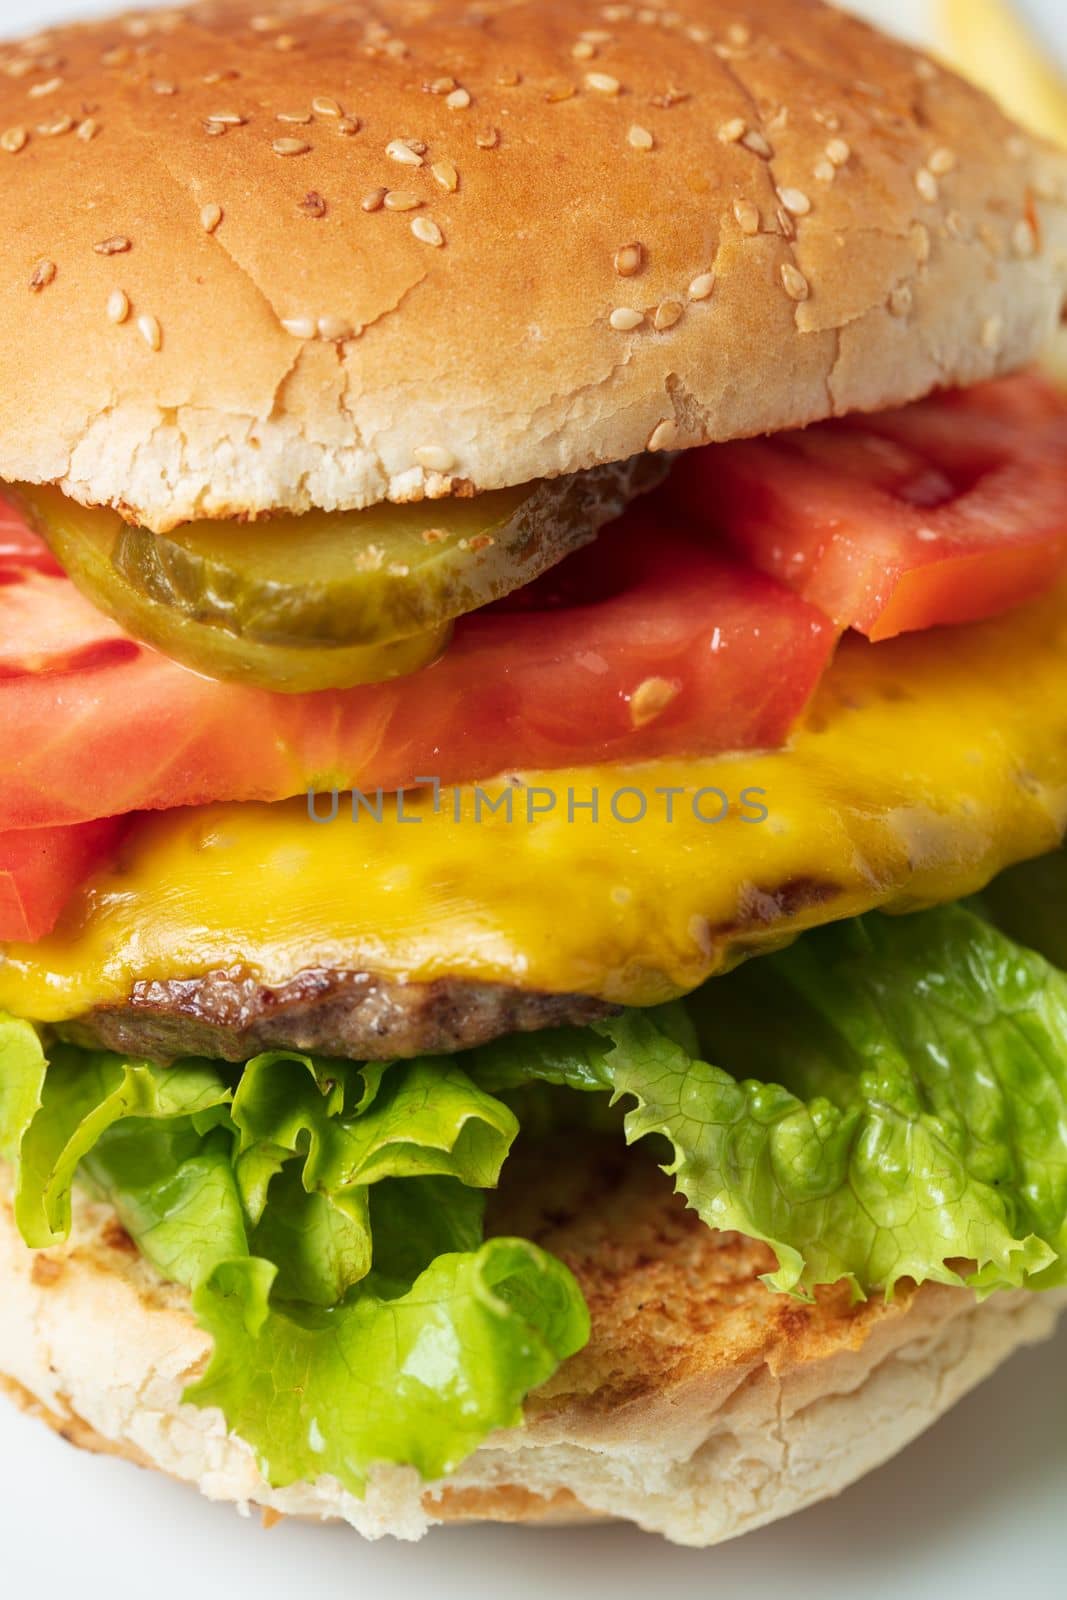 Cheeseburger with tomato and lettuce . High quality photo